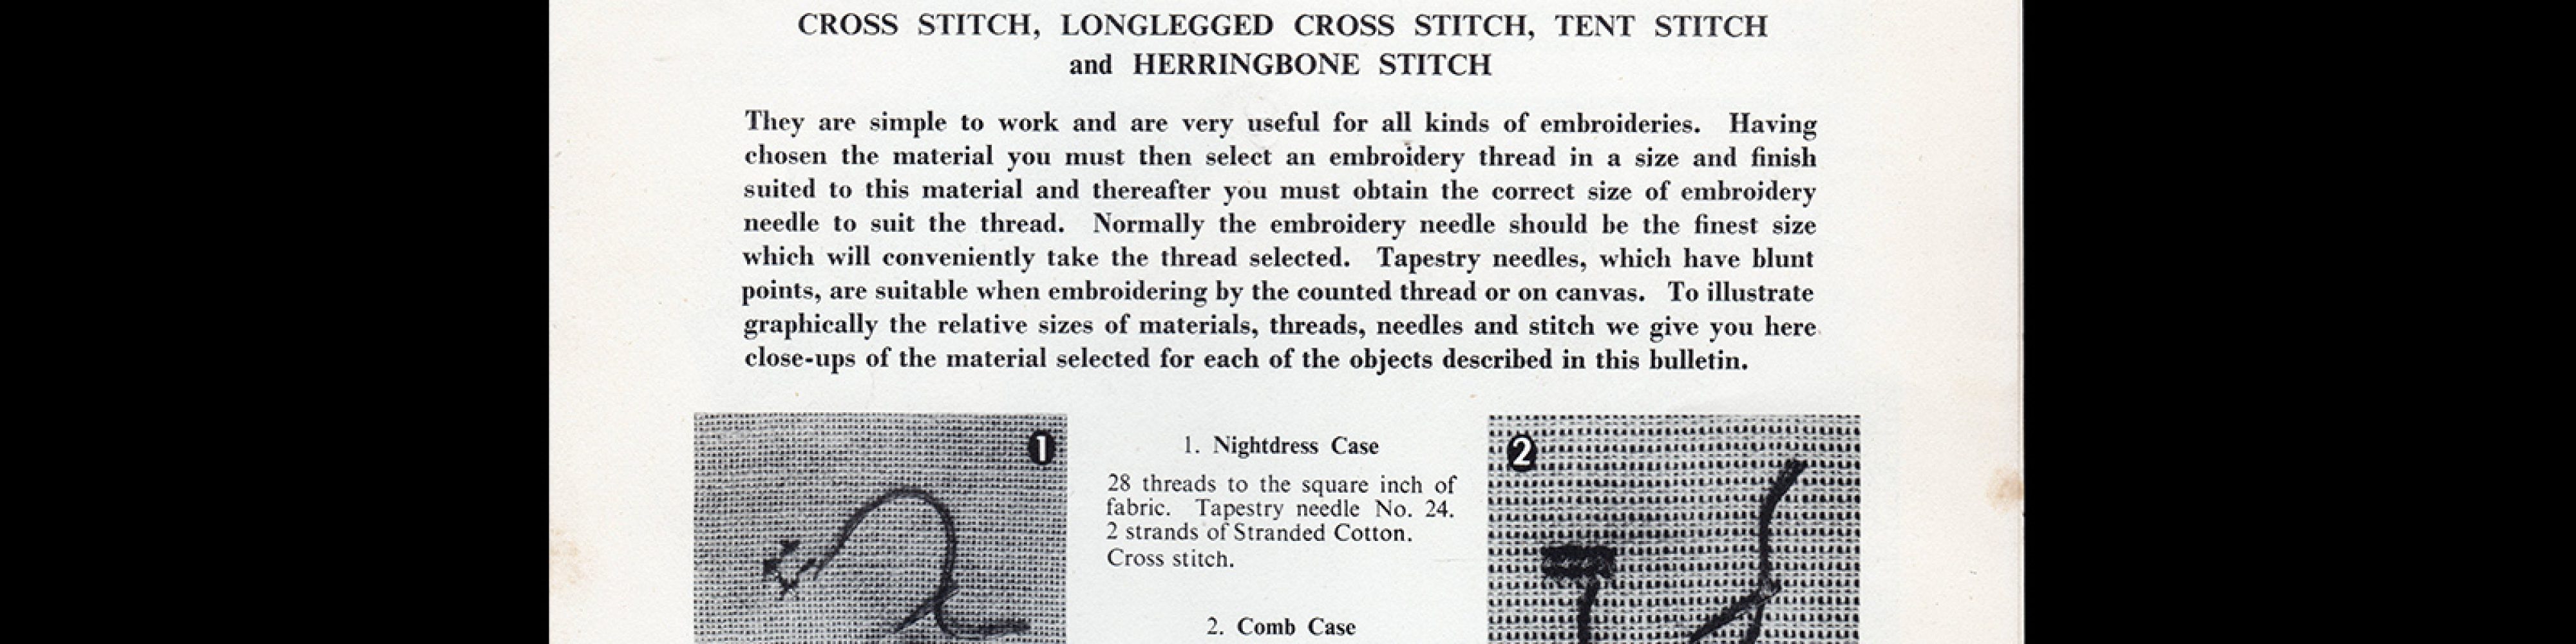 And So To Sew Bulletin 2b, 1950s